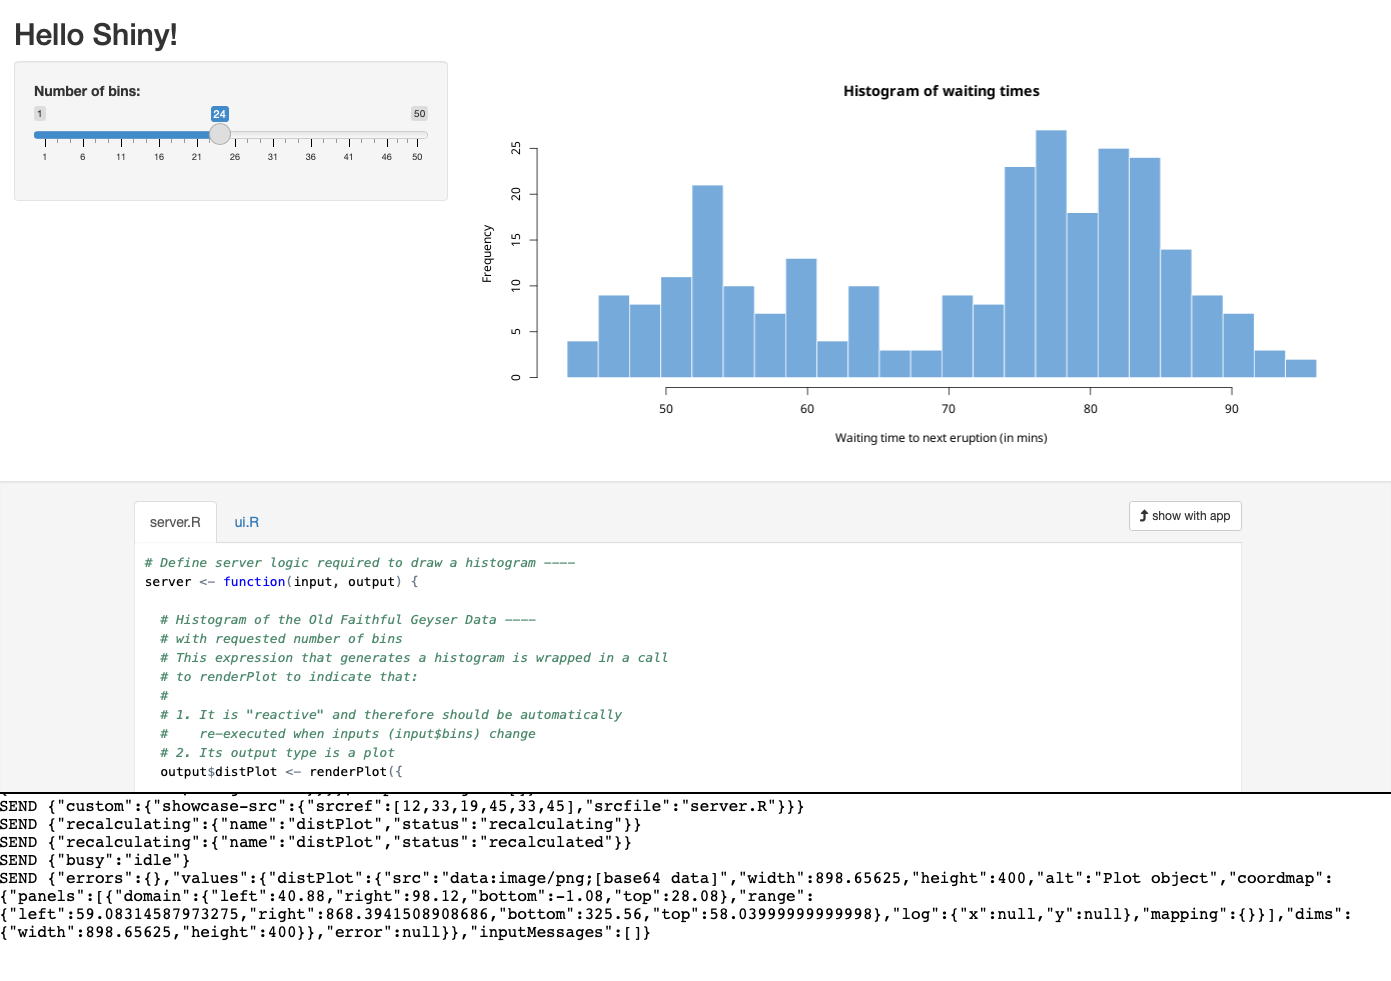 A screenshot of the webR Shiny demo. The shiny app is shown in the top section of the screenshot, an input slider and an output histogram plot. The lower section shows the normally server-side Shiny package console output when tracing is enabled.